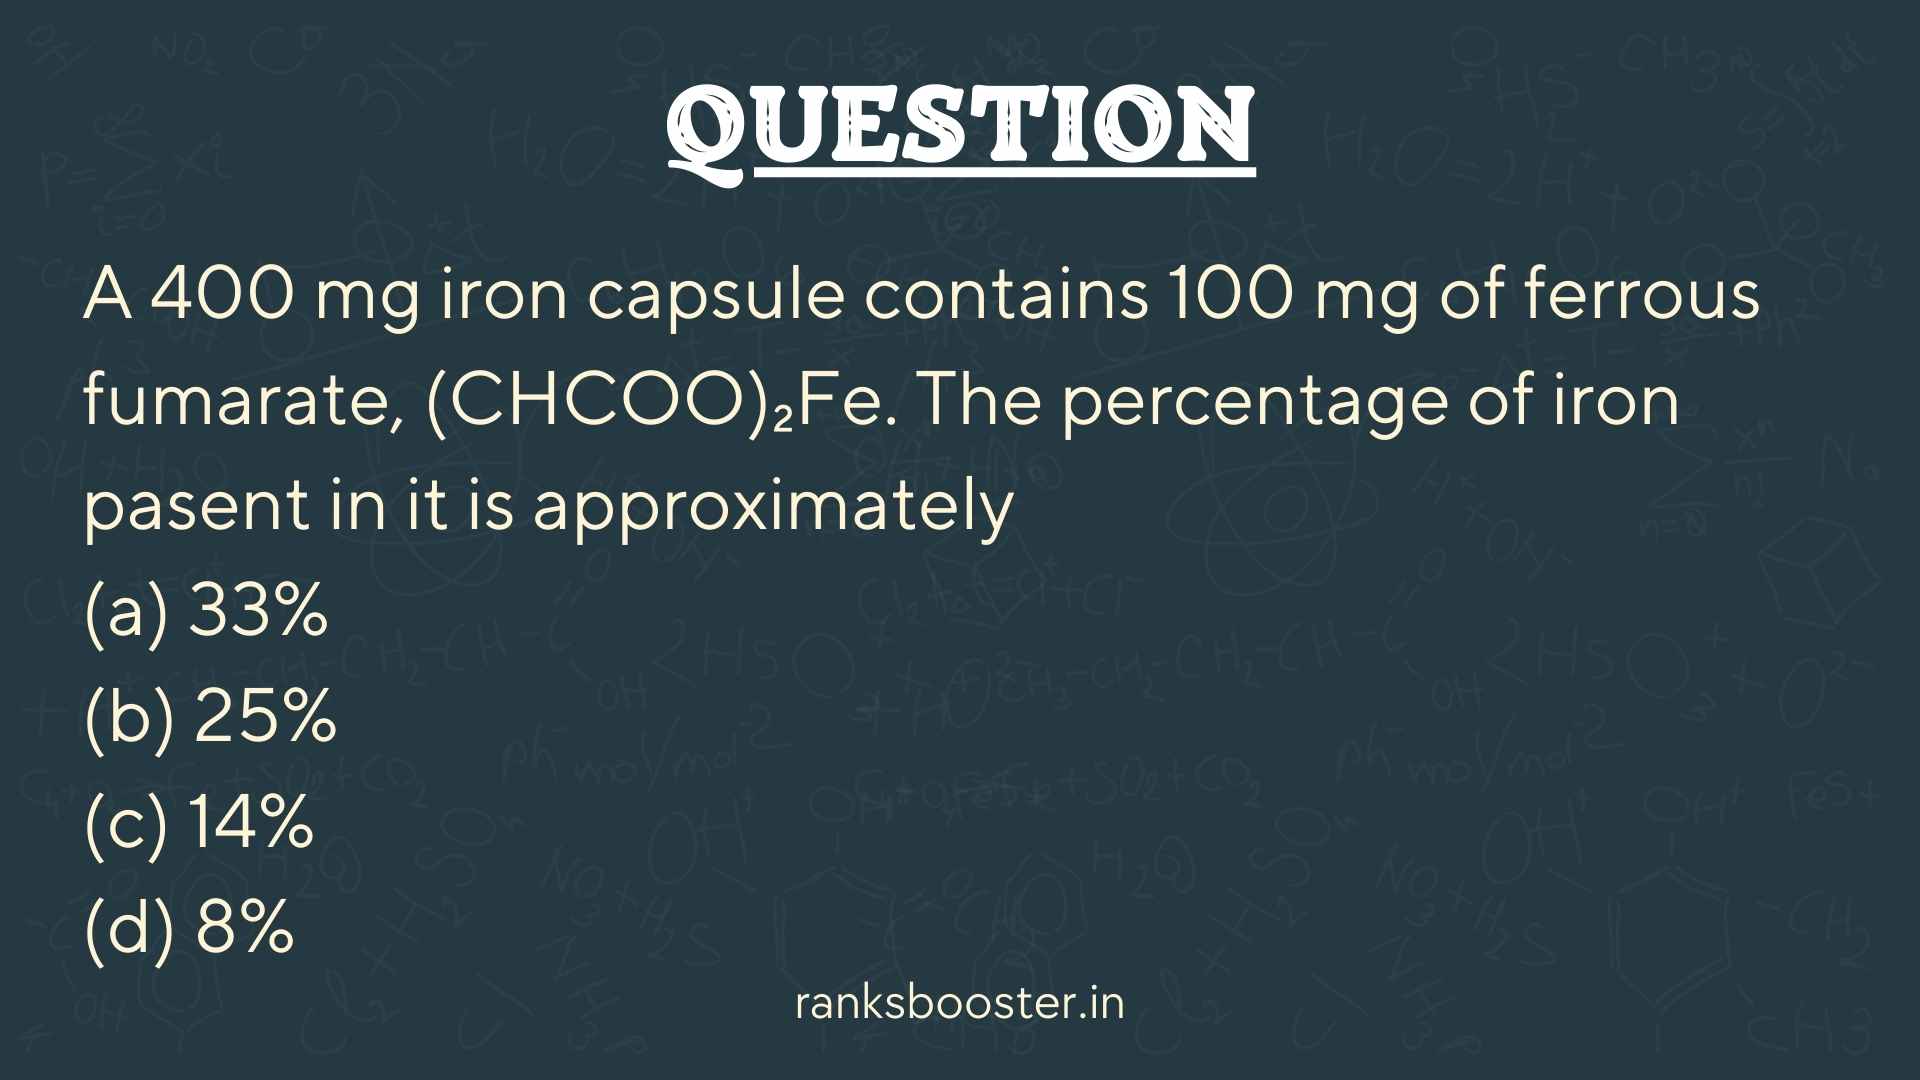 Question: A 400 mg iron capsule contains 100 mg of ferrous fumarate, (CHCOO)₂Fe. The percentage of iron pasent in it is approximately (a) 33% (b) 25% (c) 14% (d) 8%